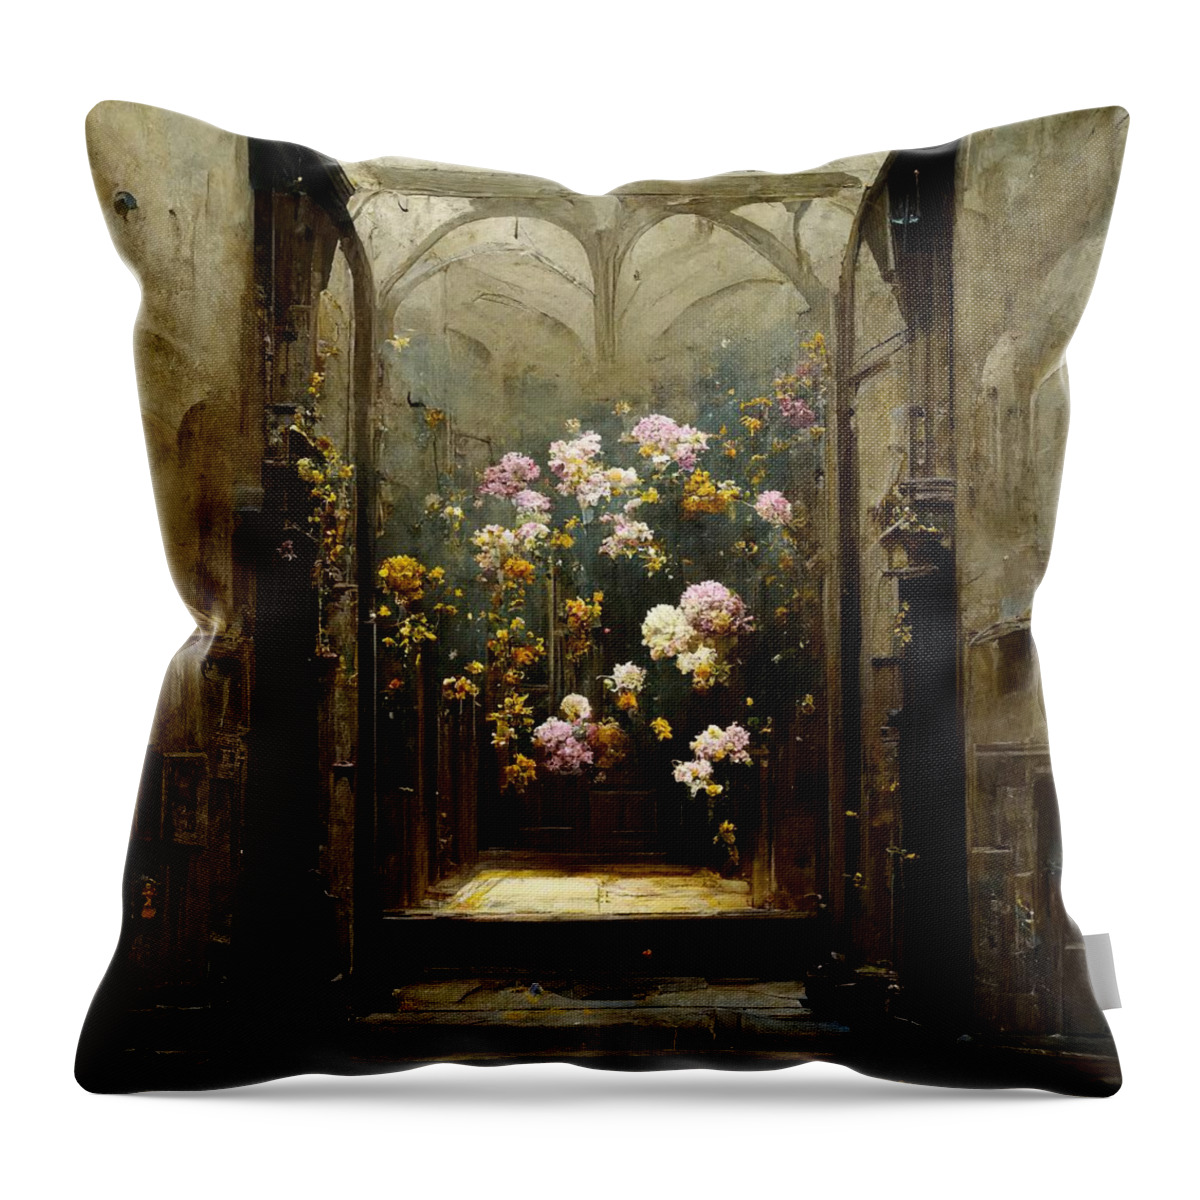 Flowers Throw Pillow featuring the digital art The Conservatory by Nickleen Mosher